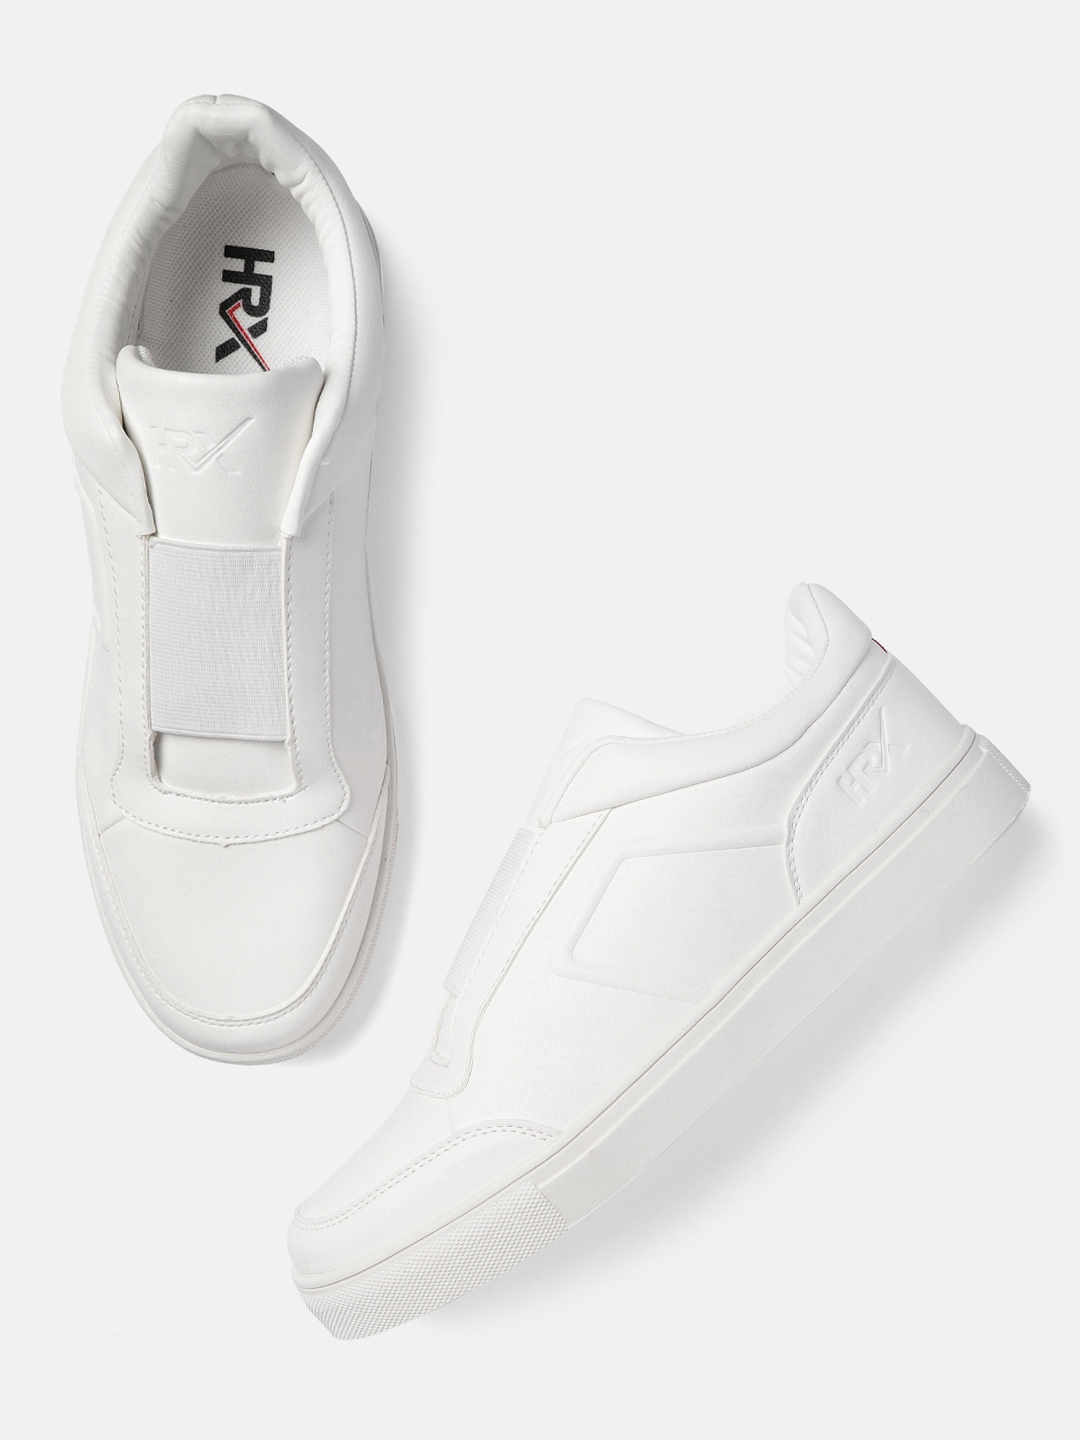 HRX by Hrithik Roshan HRX by Hrithik Roshan Men White Perforated Gamescape Sneakers  Sneakers For Men - Buy HRX by Hrithik Roshan HRX by Hrithik Roshan Men White  Perforated Gamescape Sneakers Sneakers